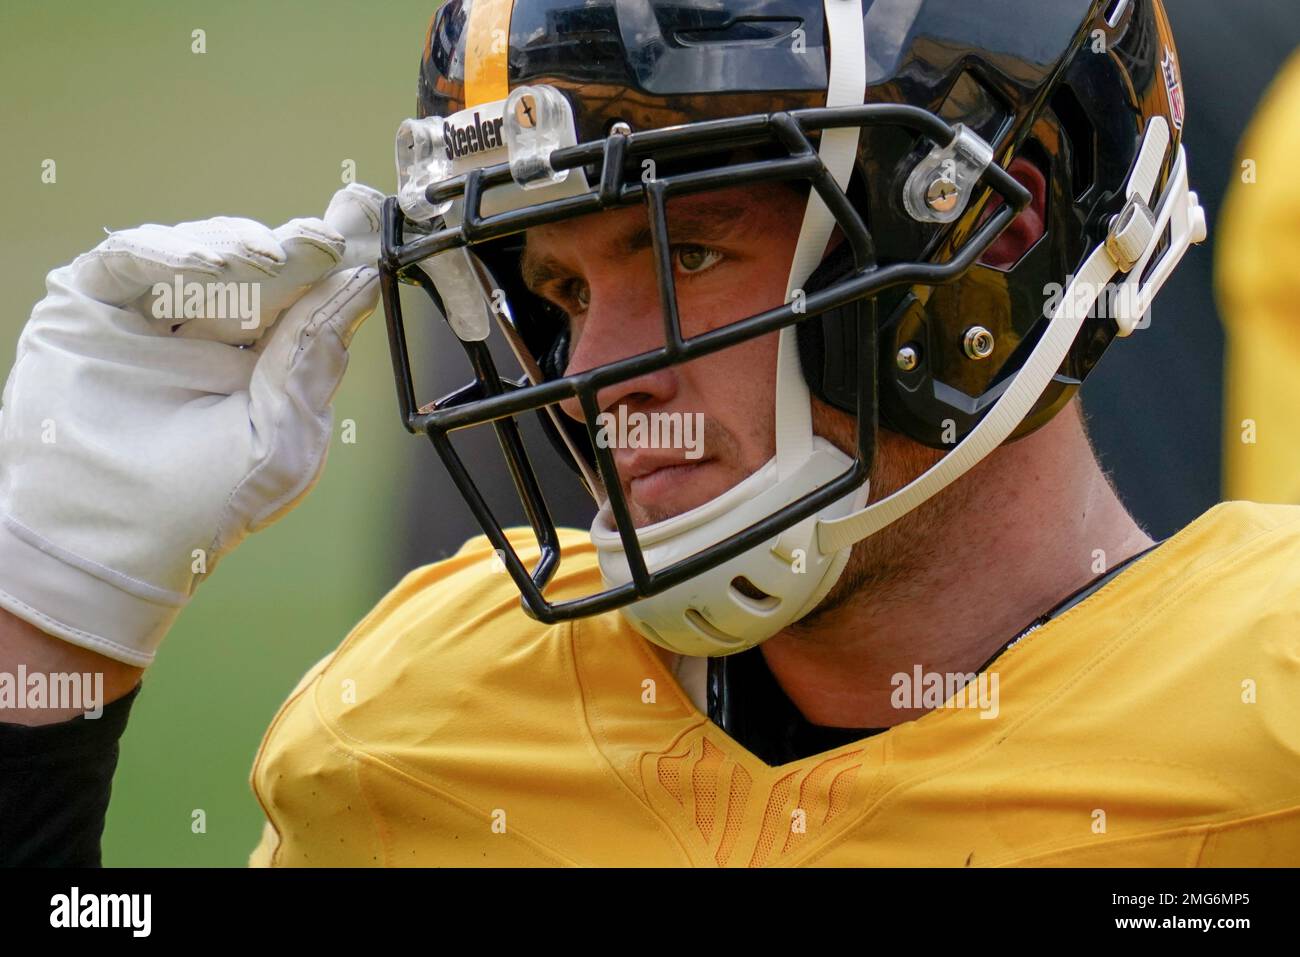 Pittsburgh Steelers linebacker T.J. Watt (90) grabs his mouth guard before  going through a drill during an NFL football training camp practice,  Monday, Aug. 24, 2020, in Pittsburgh. Watt is coming off